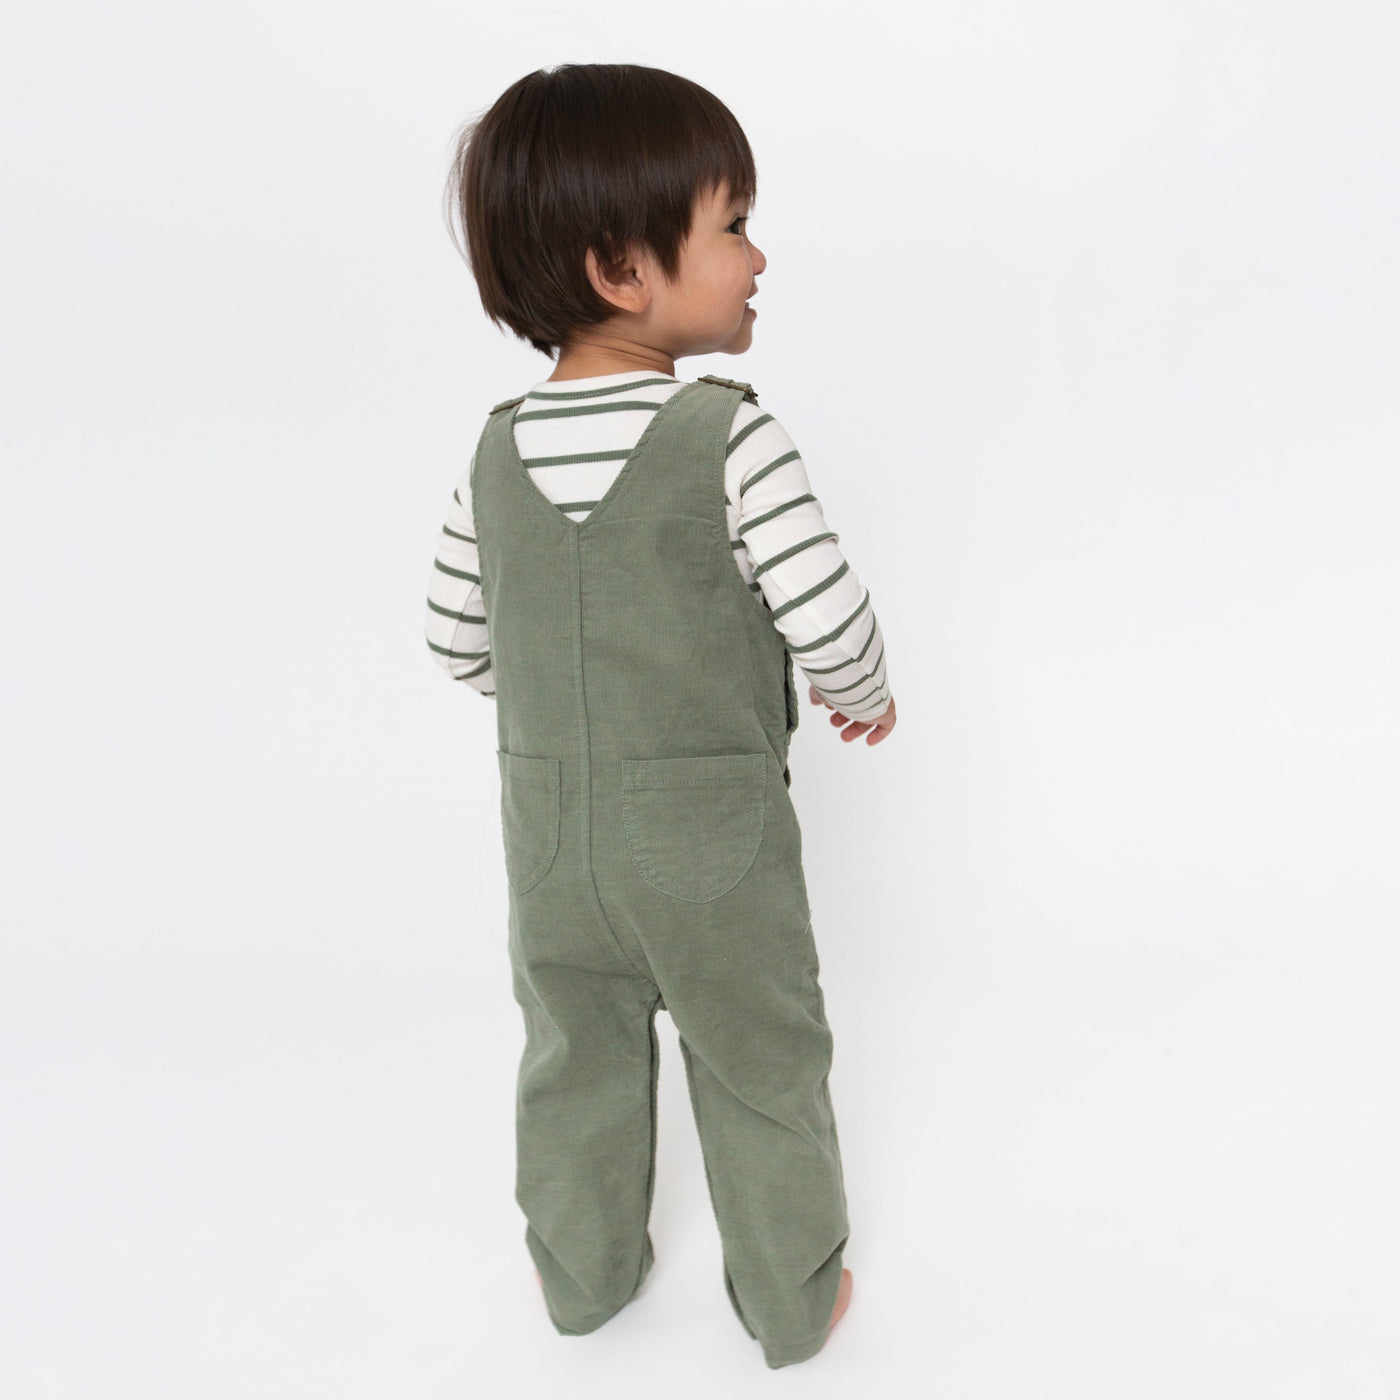 Classic Corduroy Overall - Oil Green - Angel Dear